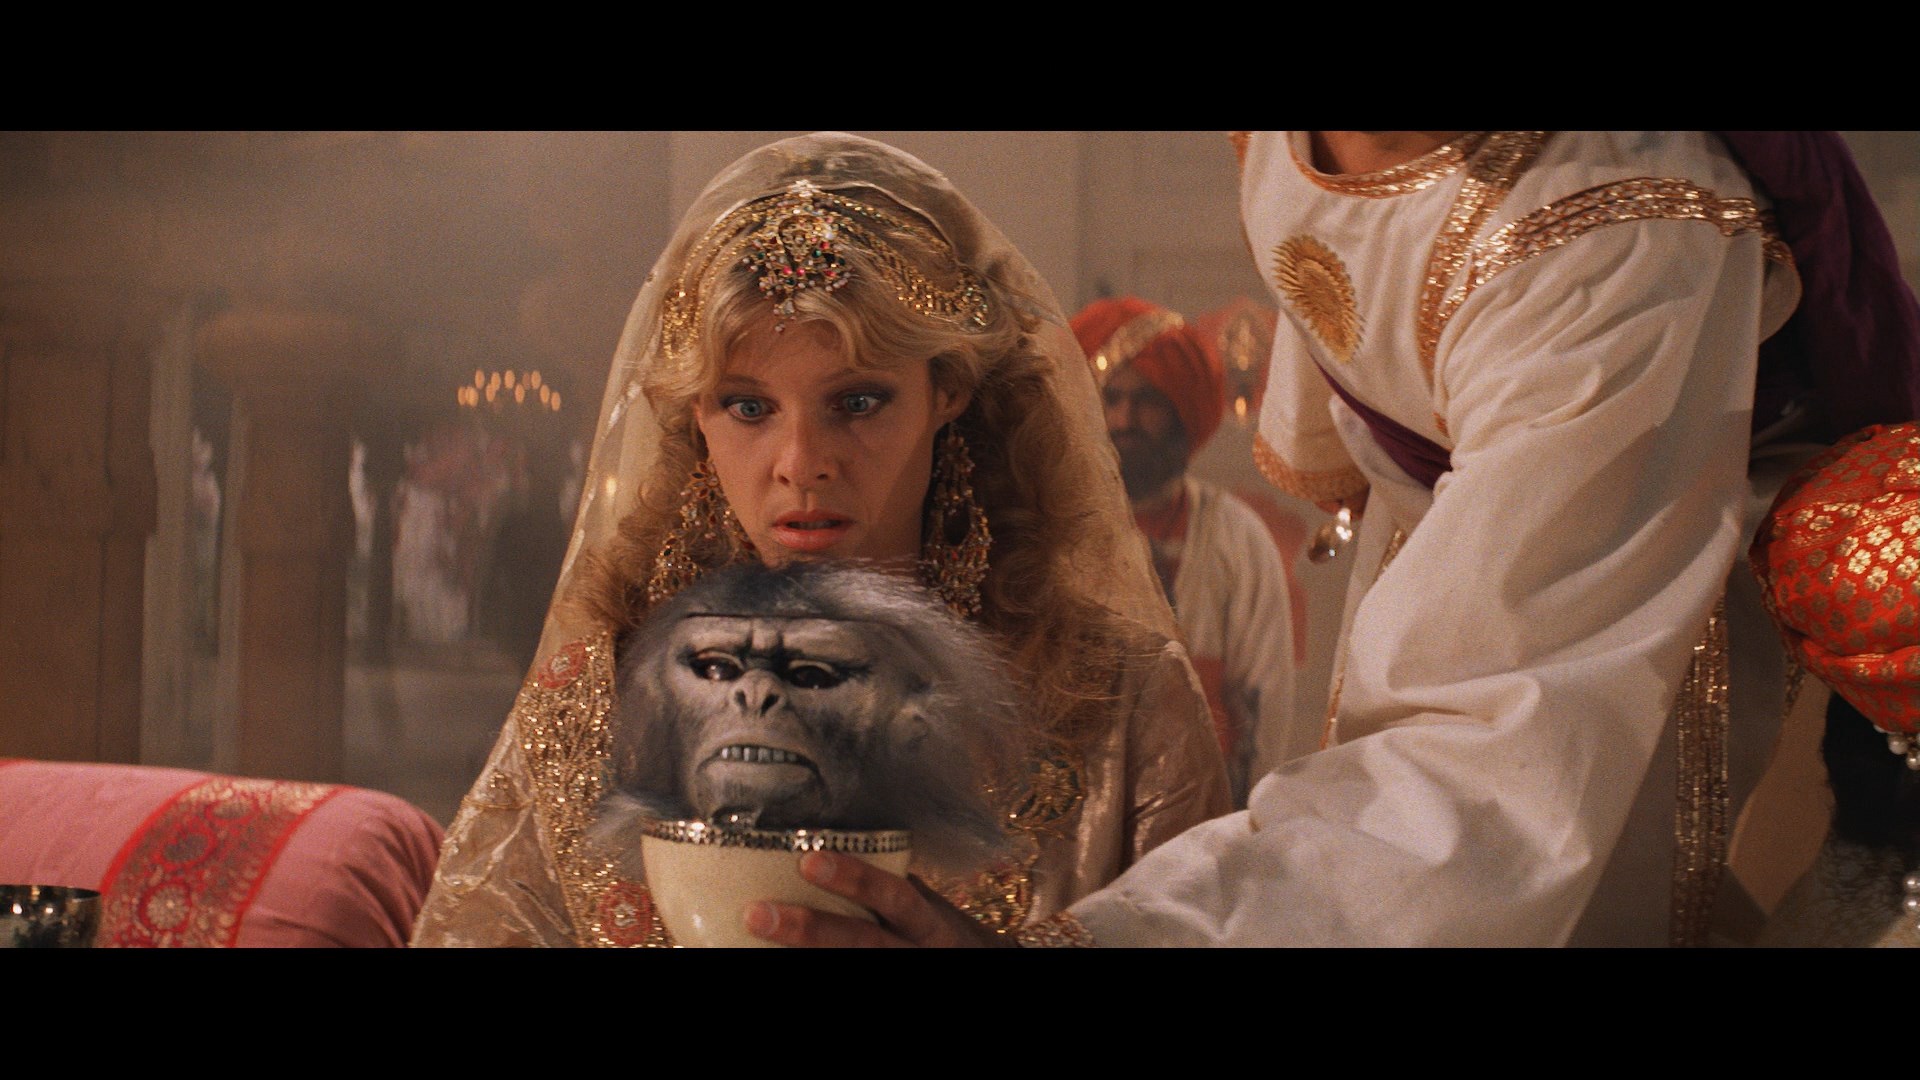 INDIANA JONES AND THE TEMPLE OF DOOM - Chilled Monkey Brain Head - Image 7 of 9